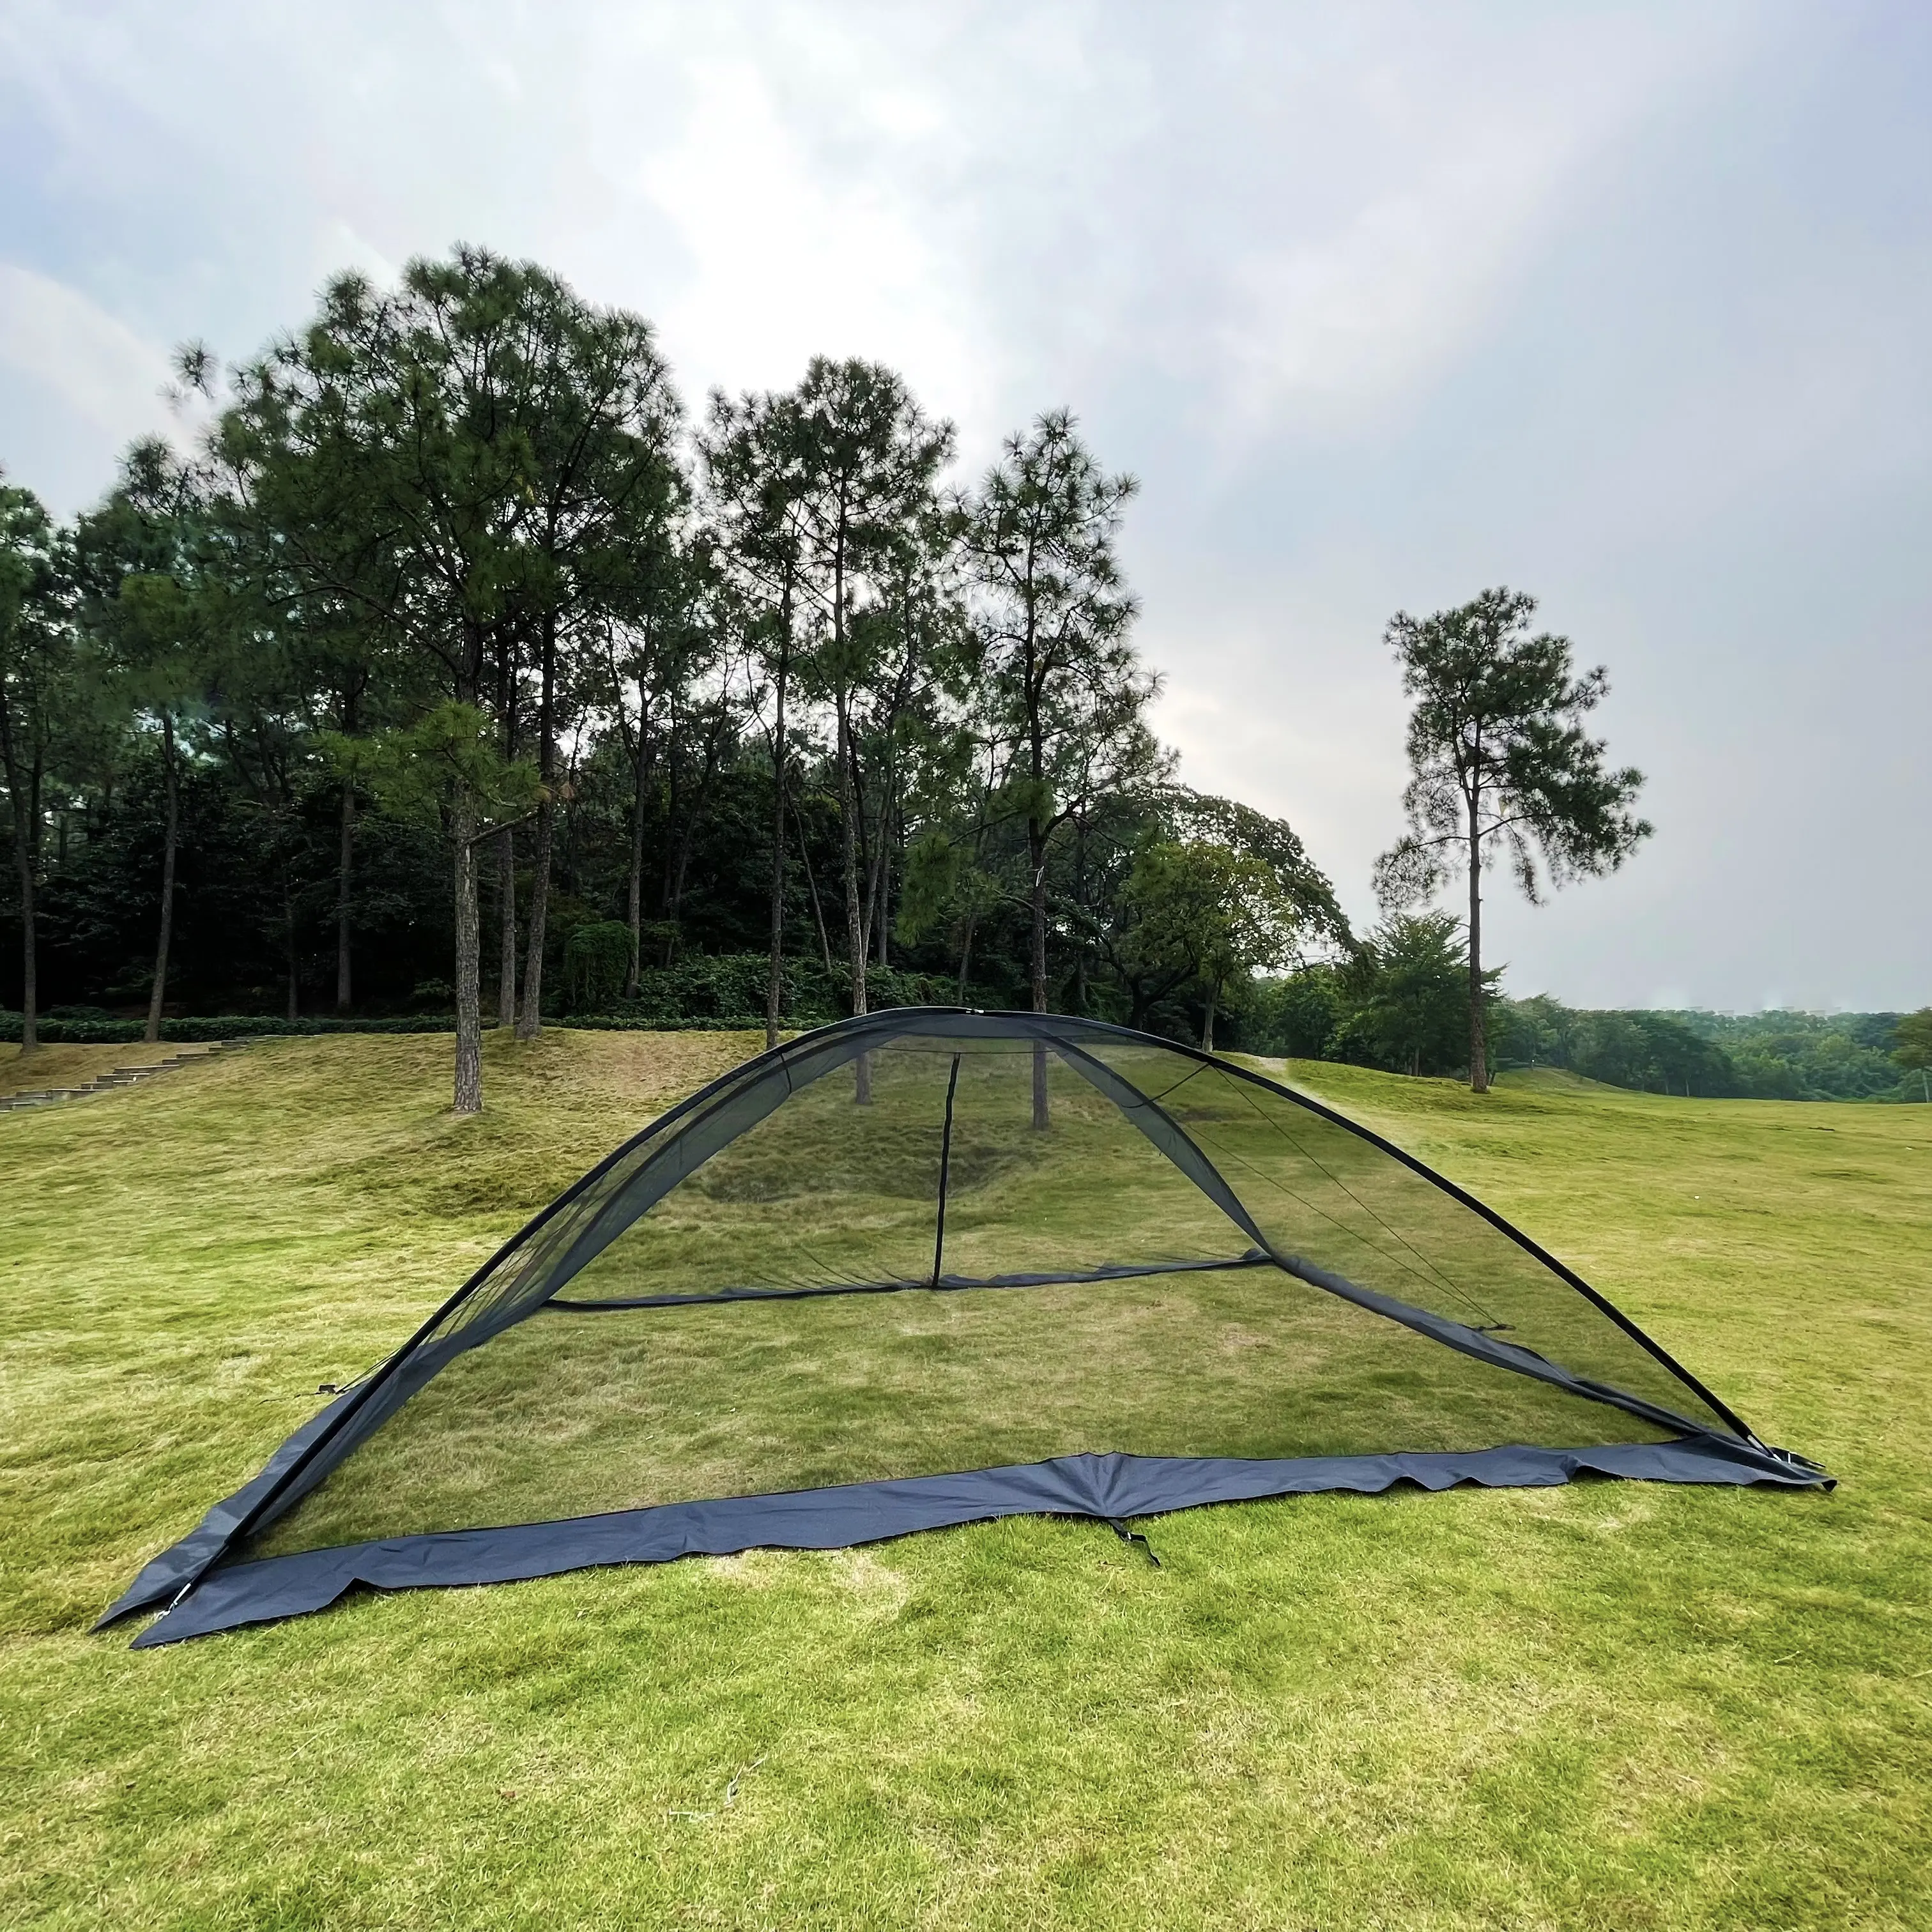 Premium Outdoor Double Size Pond Netting Dome with Tent Ropes and Zipper Nylon Mesh Garden Cover to Repel Mosquitoes Tent